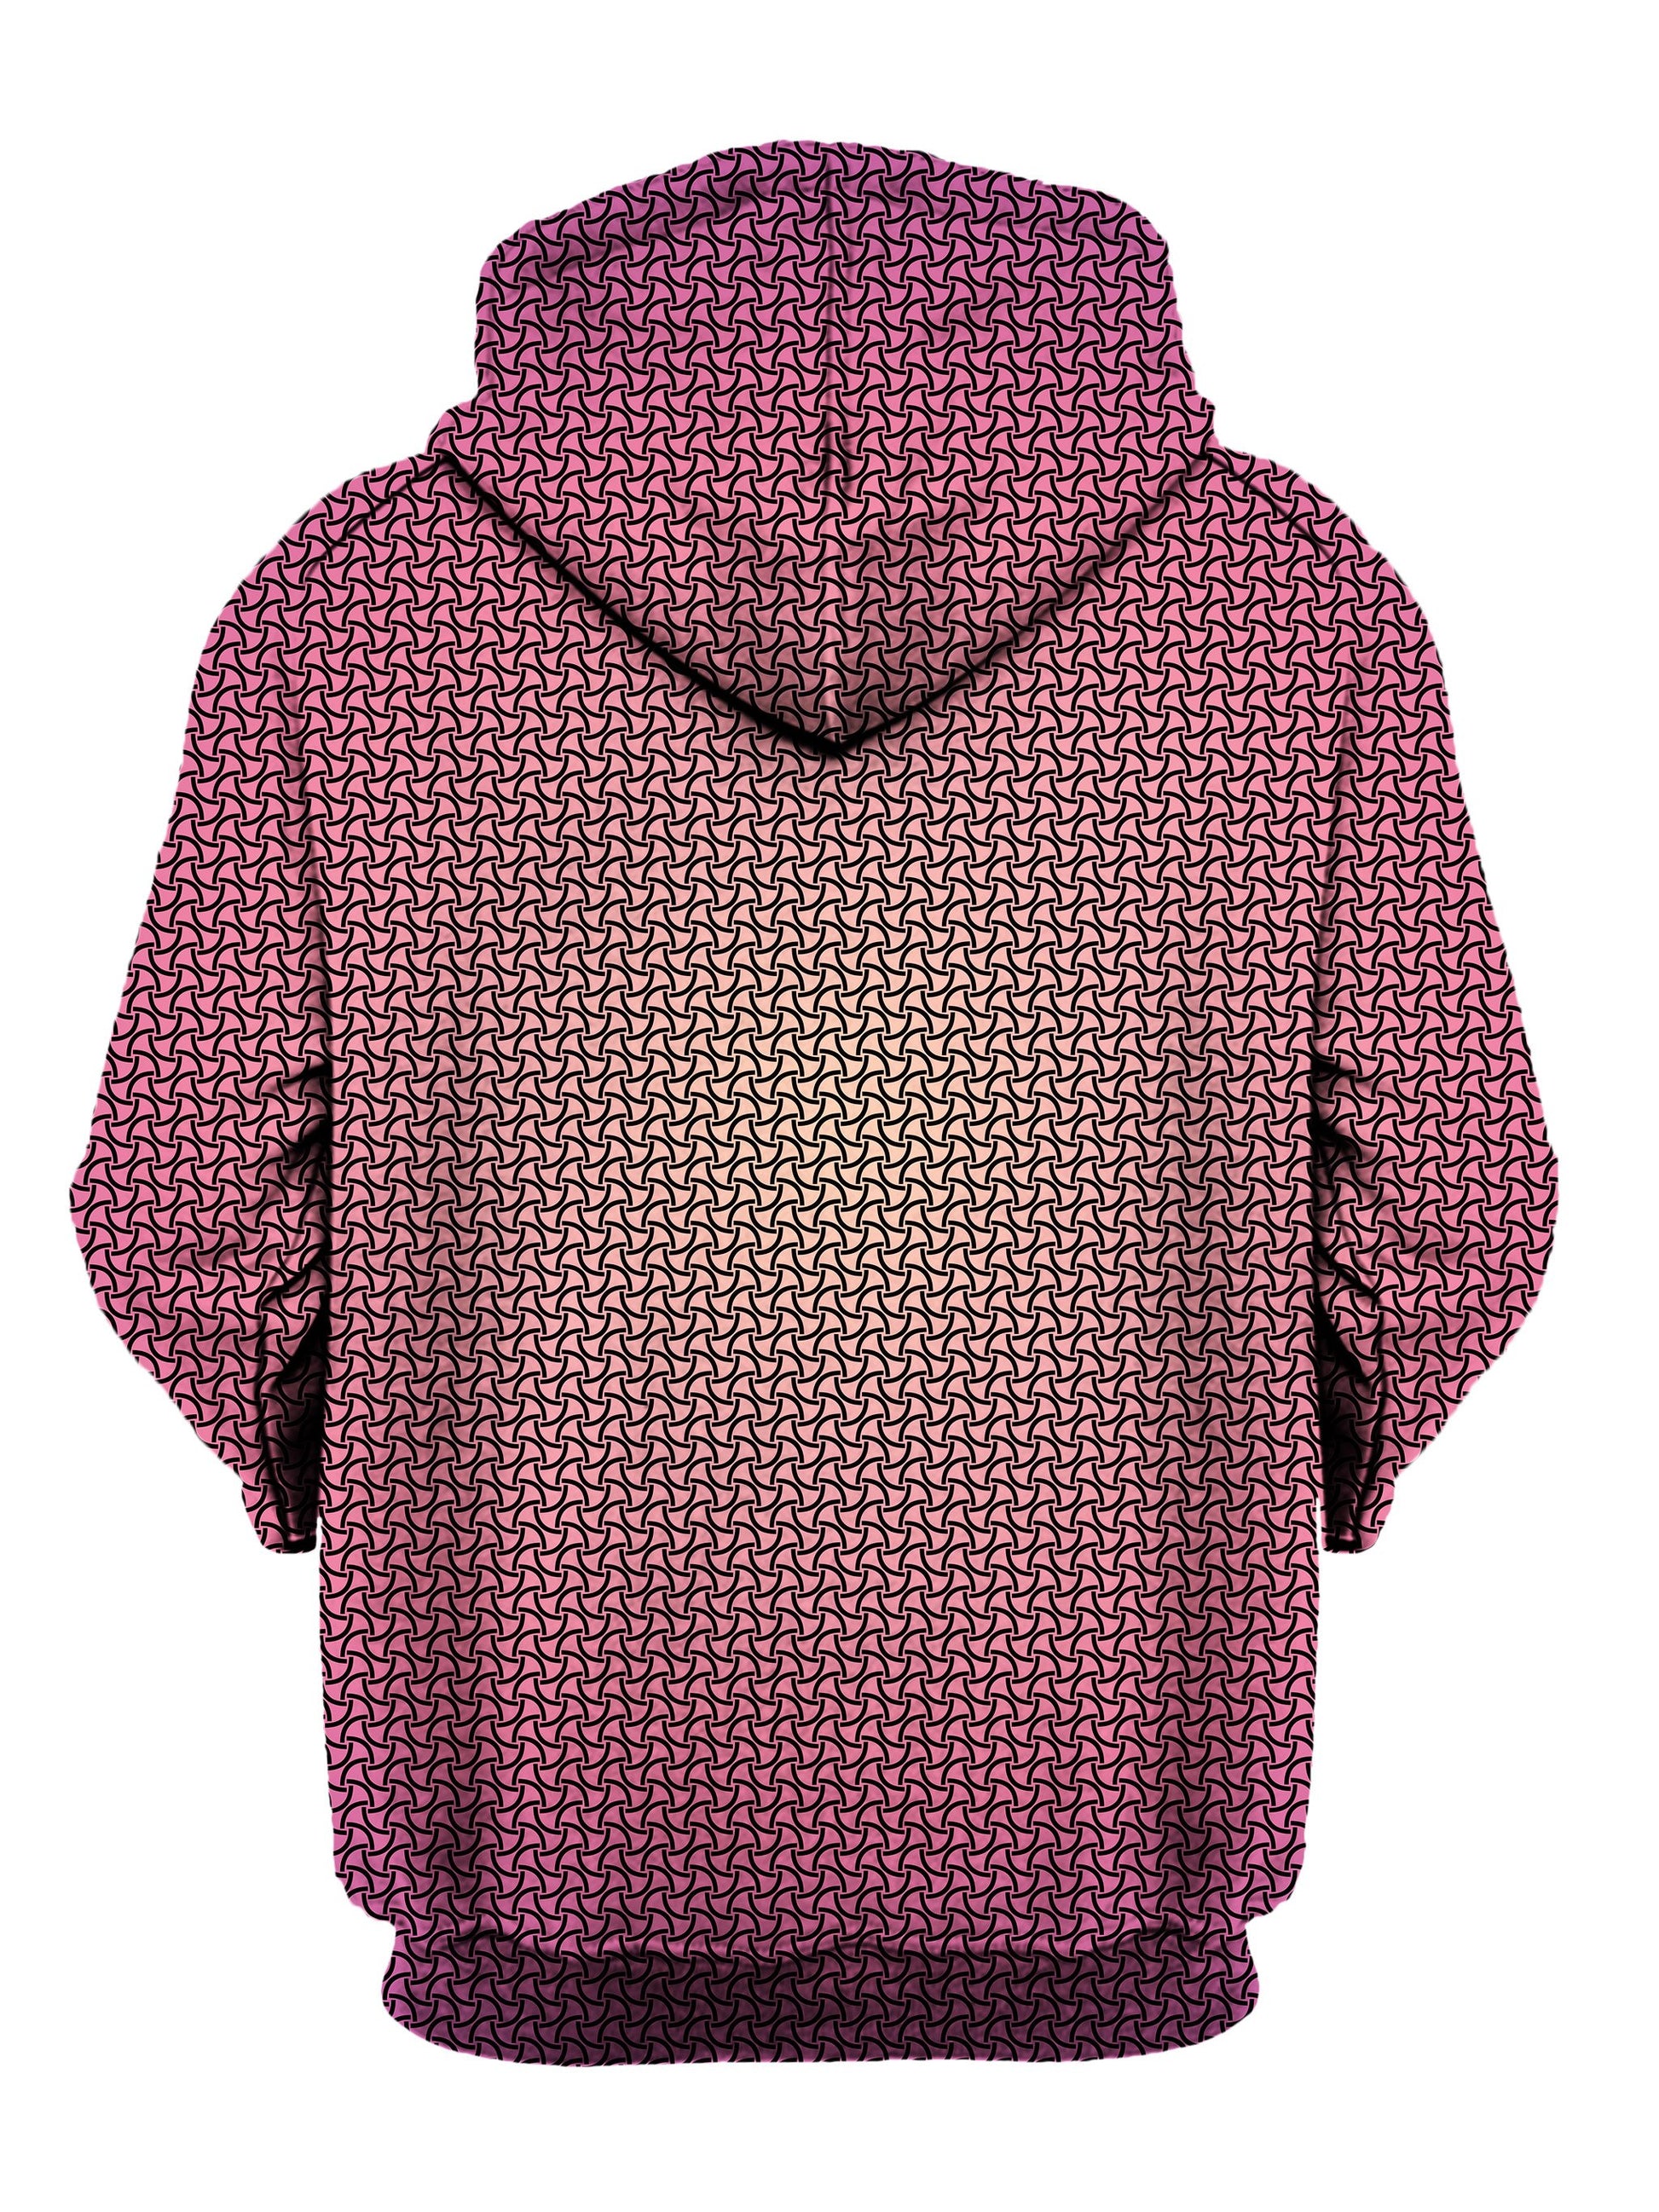 psychedelic hoodie - pink and yellow fade pattern